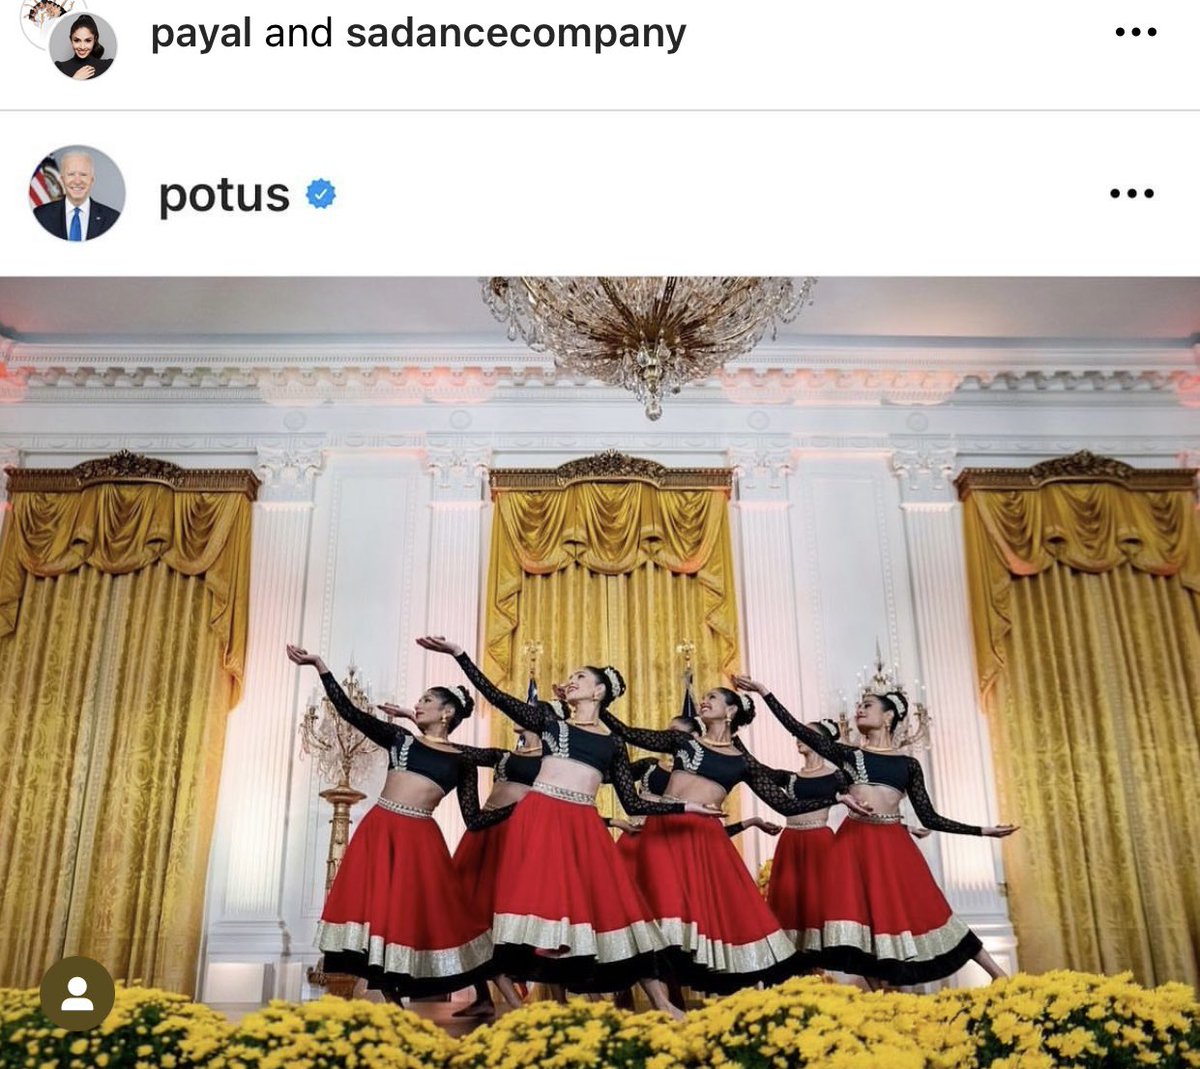 @POTUS Absolutely incredible to see @PayalKadakia, a girl many of us know from the Gujarati community, and her dance team, perform at the White House for Diwali. Wow!